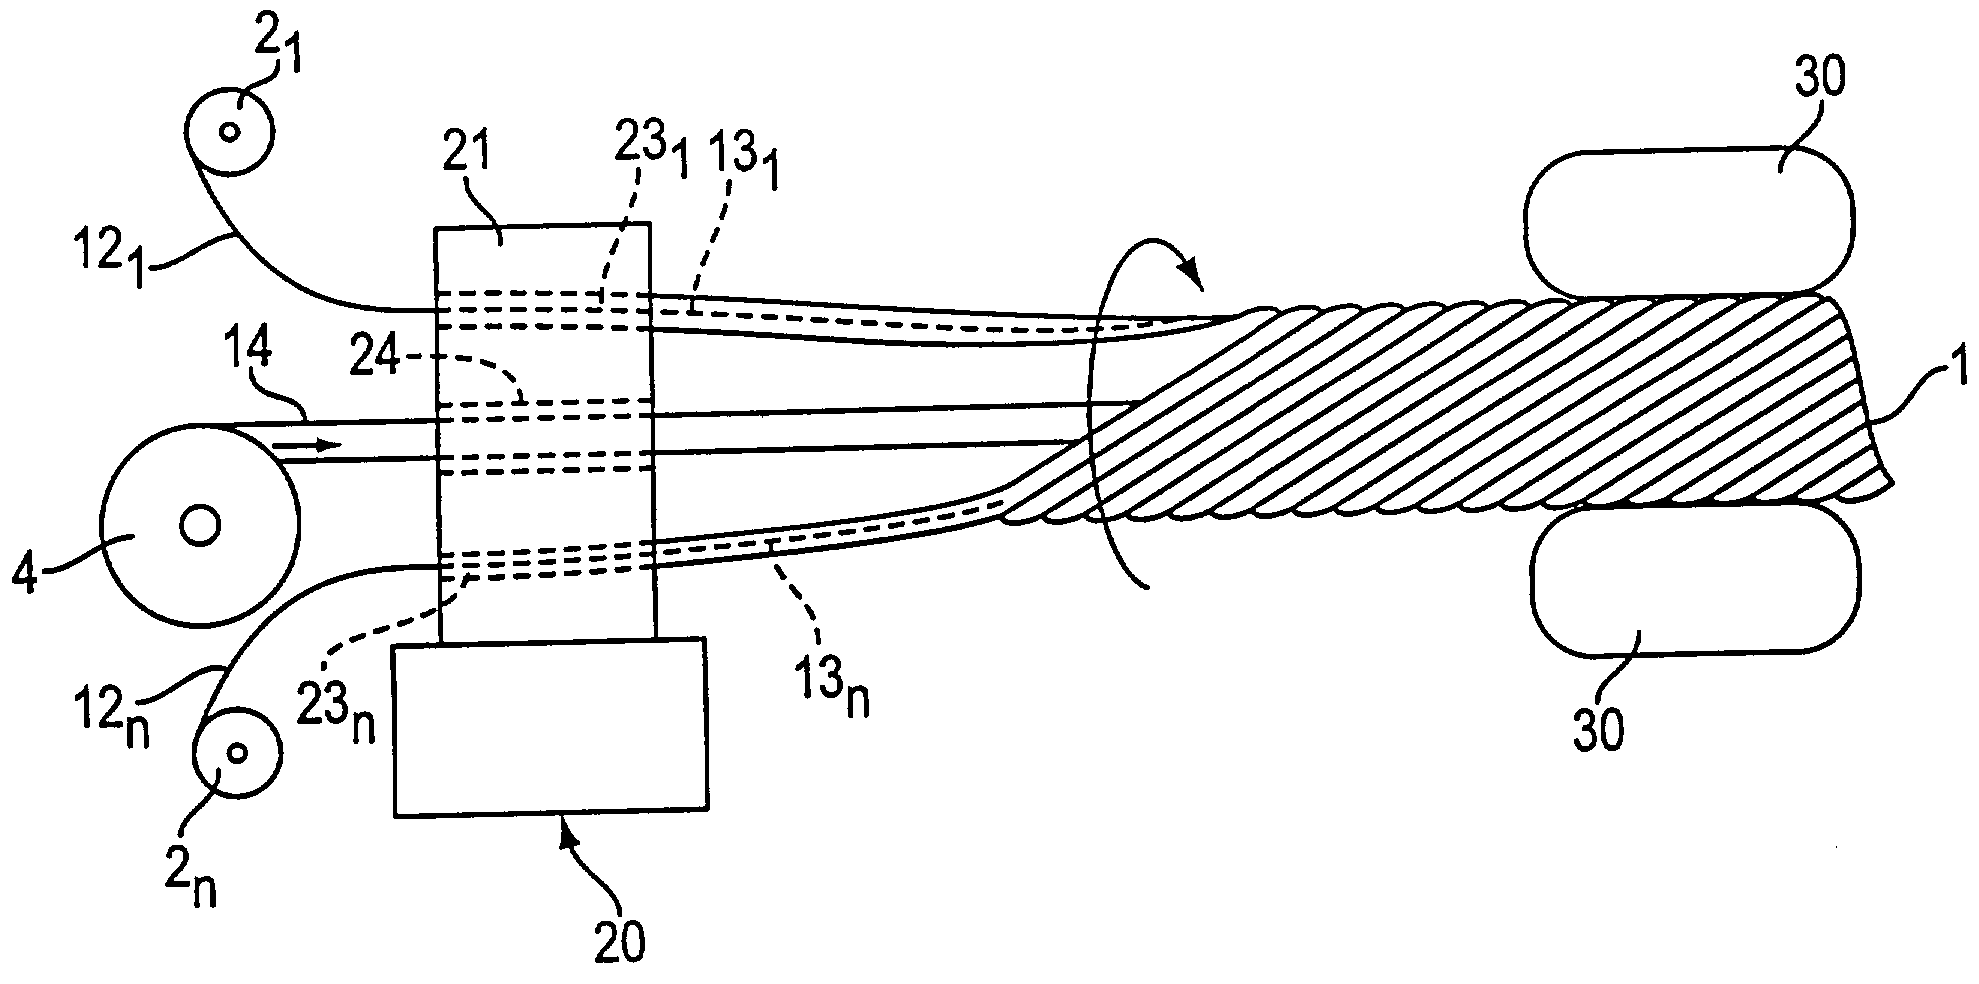 Method and apparatus for solid-stranding a flextube unit